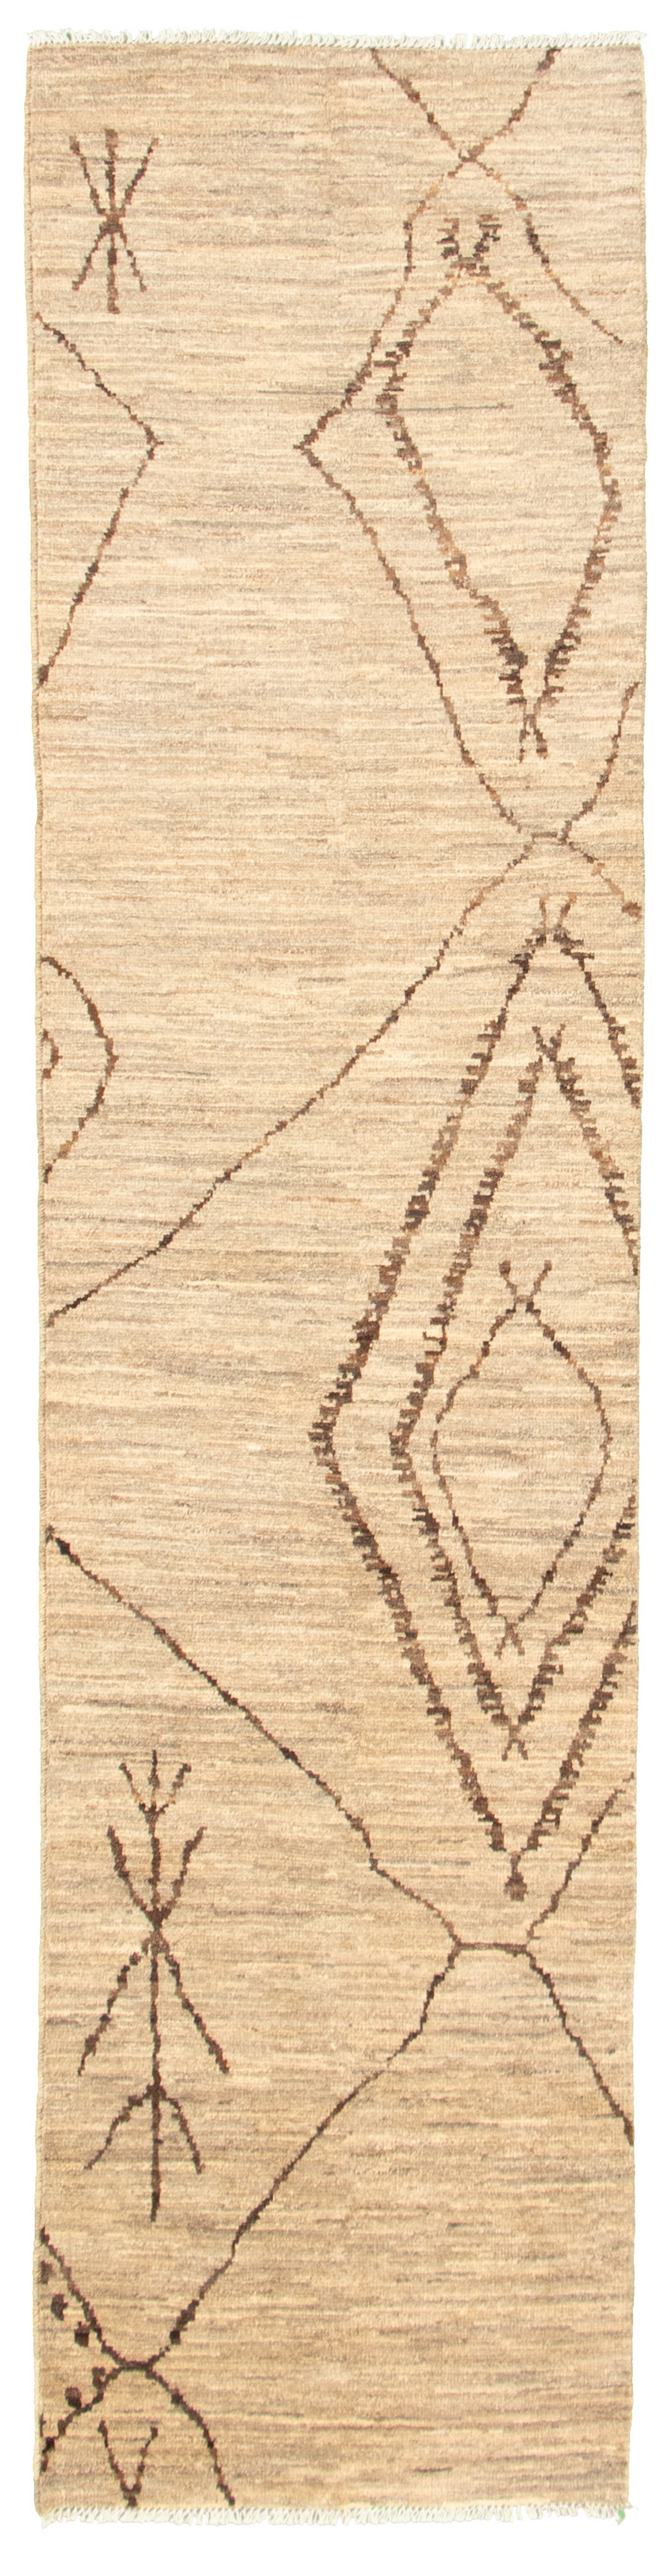 Hand-knotted Marrakech Tan Wool Rug 2'9" x 11'7" Size: 2'9" x 11'7"  